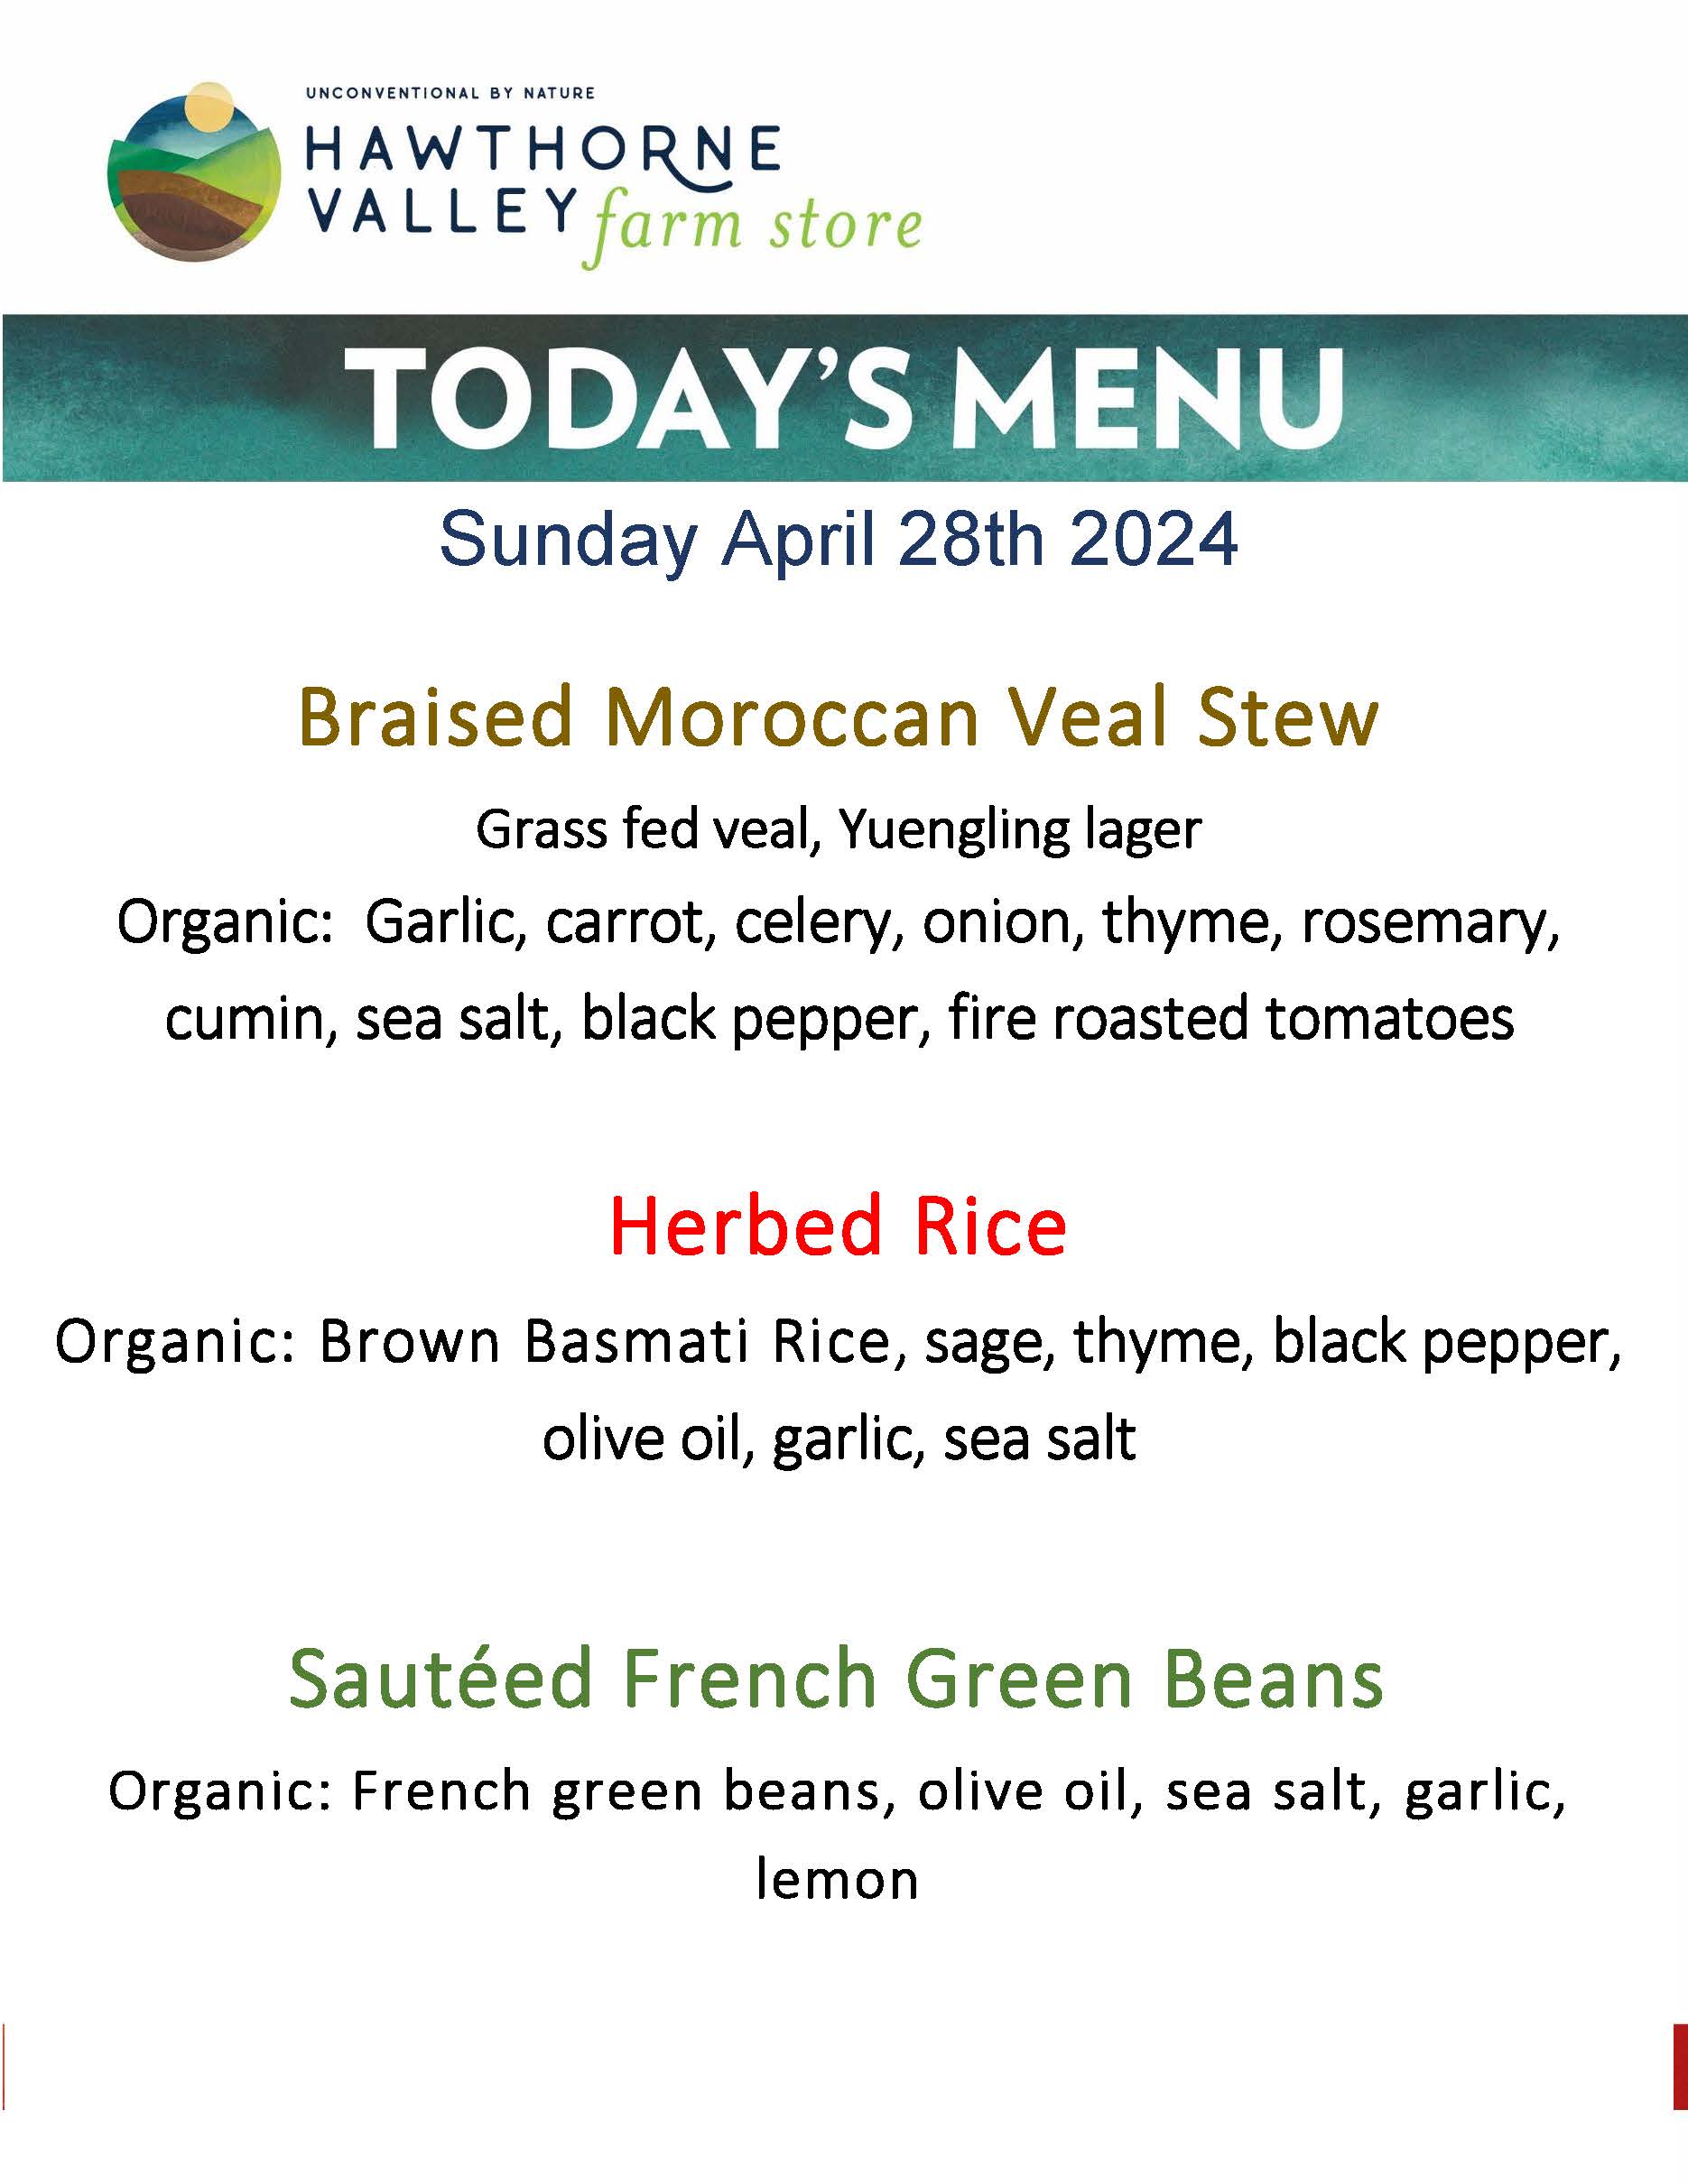 Sunday April 28 menu. Braised moroccan veal stew, herbed rice, and sautéed french green beans